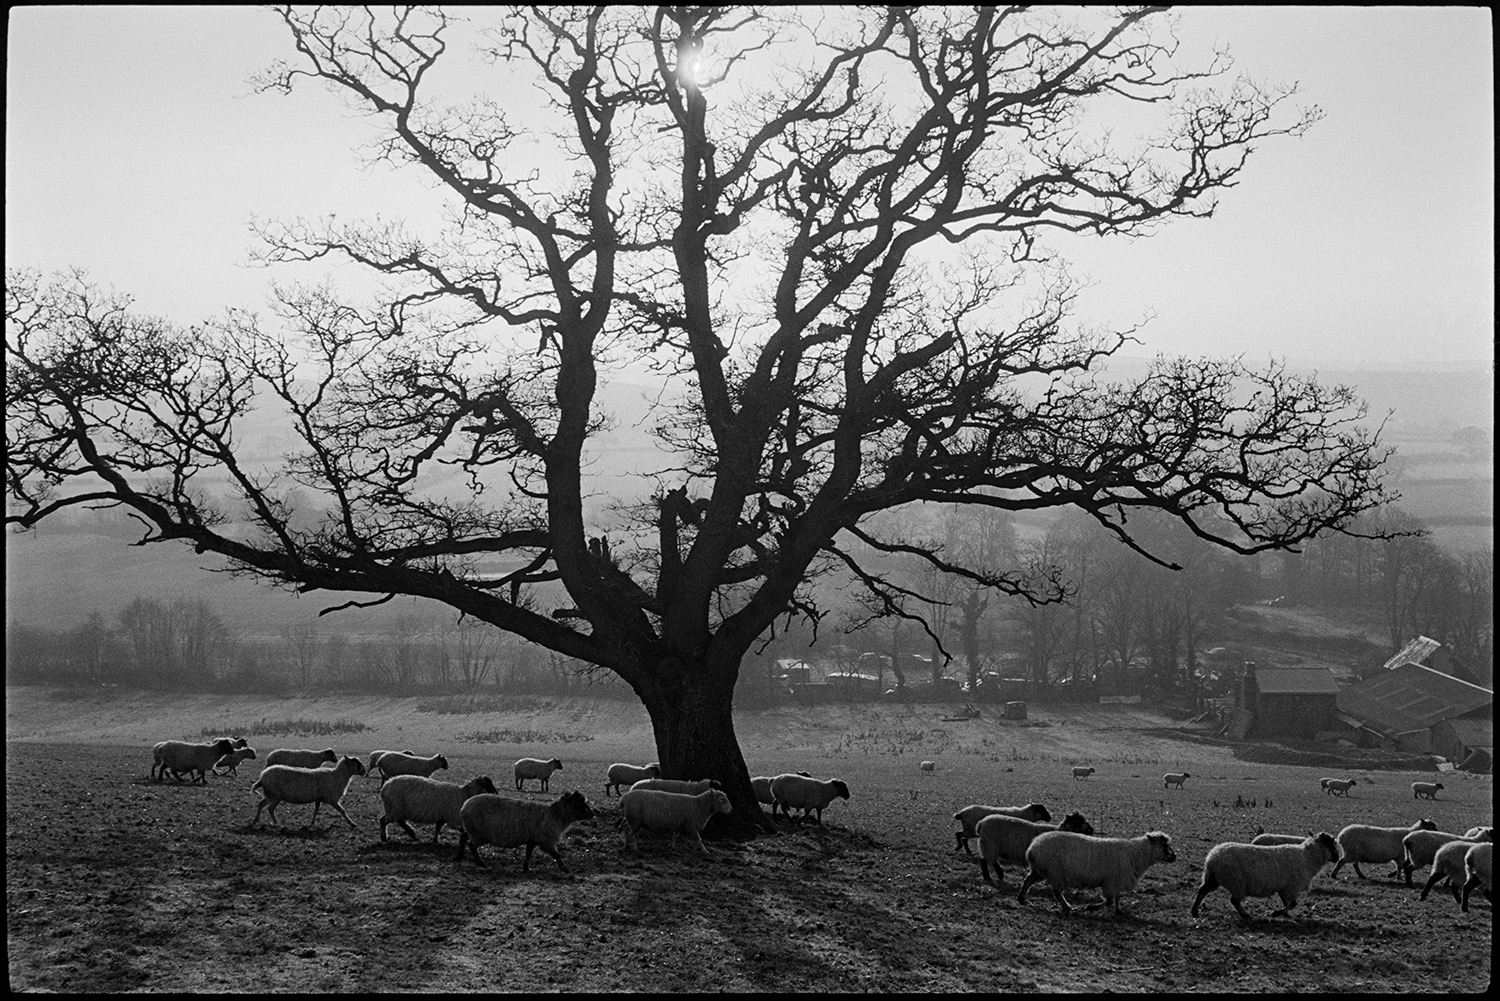 Large old oak in field with sheep, farmer feeding cattle, distant view with shepherd.
[A flock of sheep walking past a large oak tree in a field at Brushford Barton. A number of farm buildings are shown with a misty landscape  of trees and fields in the background.]